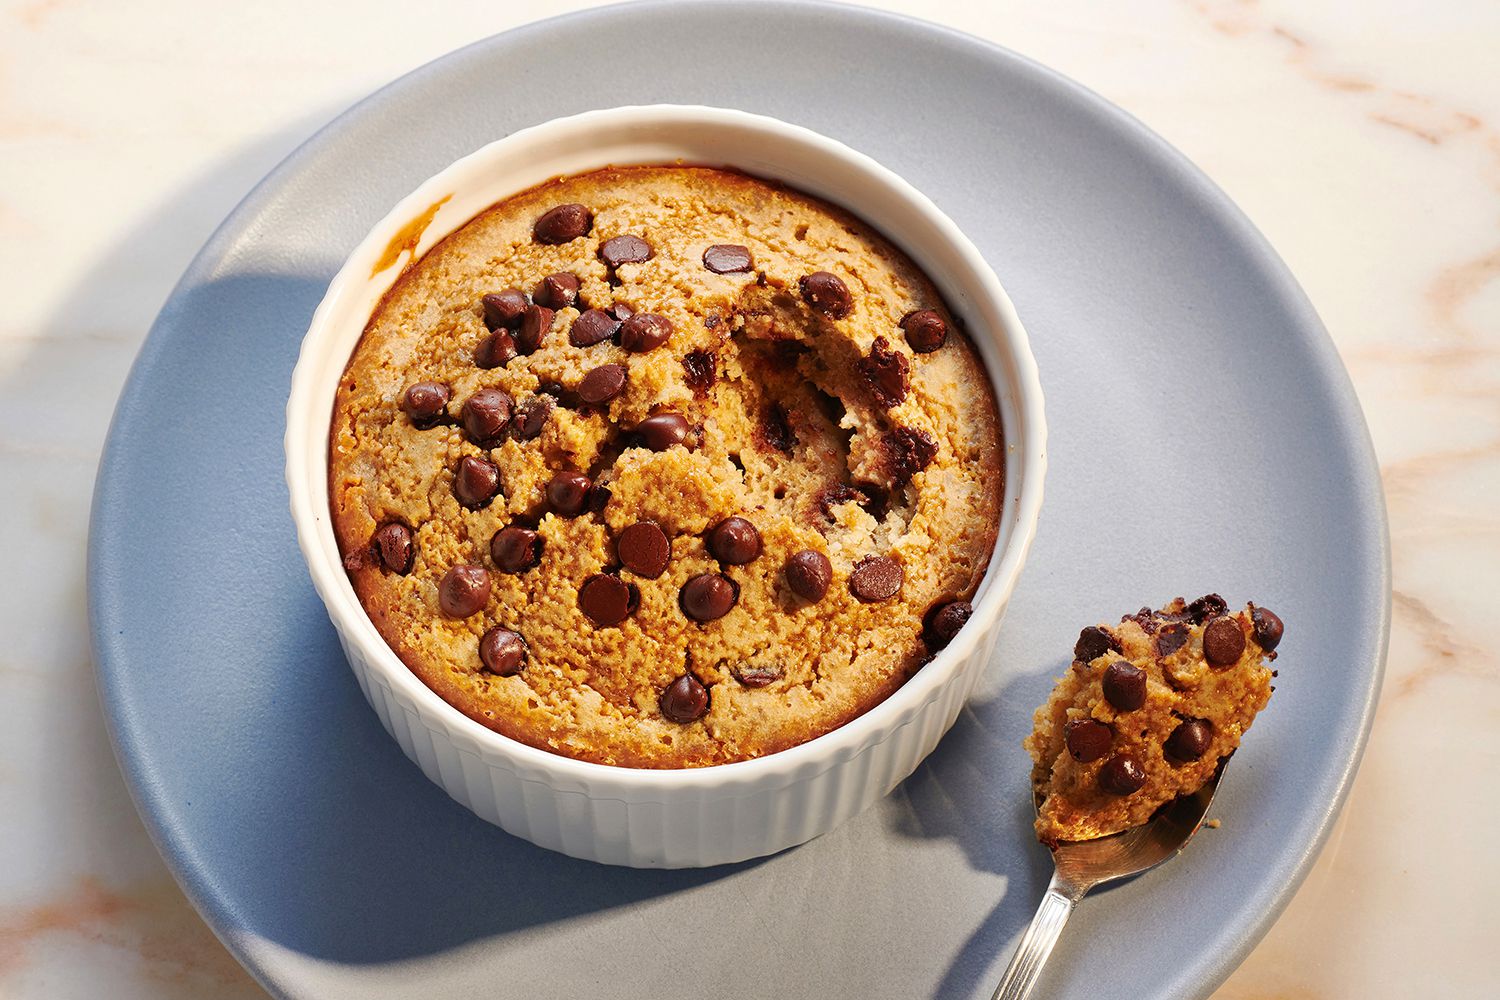 Blended Chocolate Chip Baked Oats